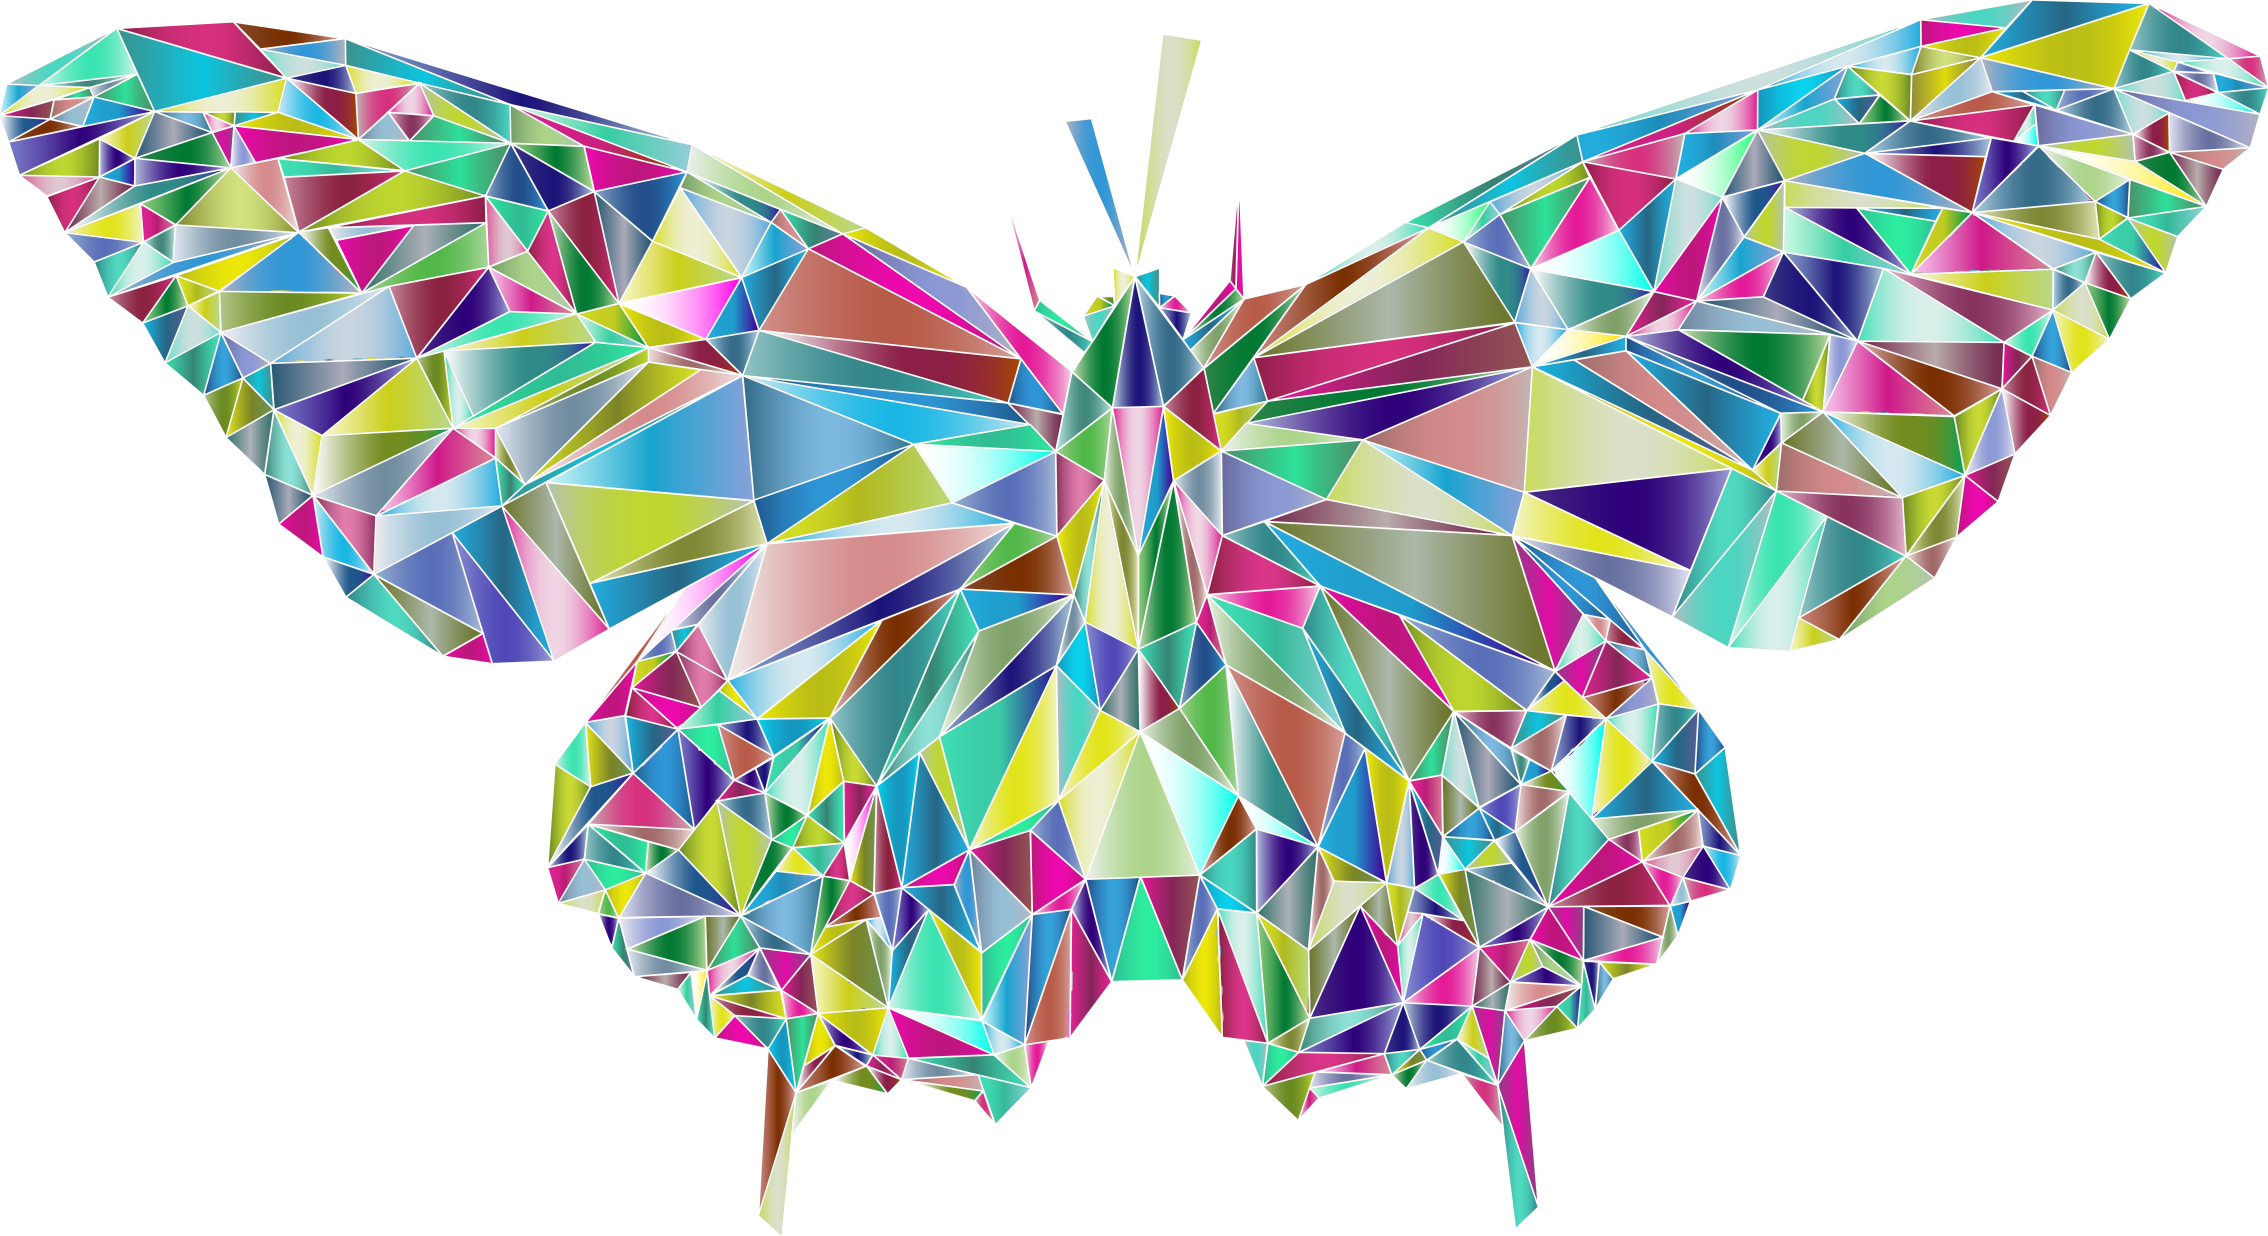 Poly Butterfly Prismatic 3 - Low Poly Art Butterflies (2268x1236)